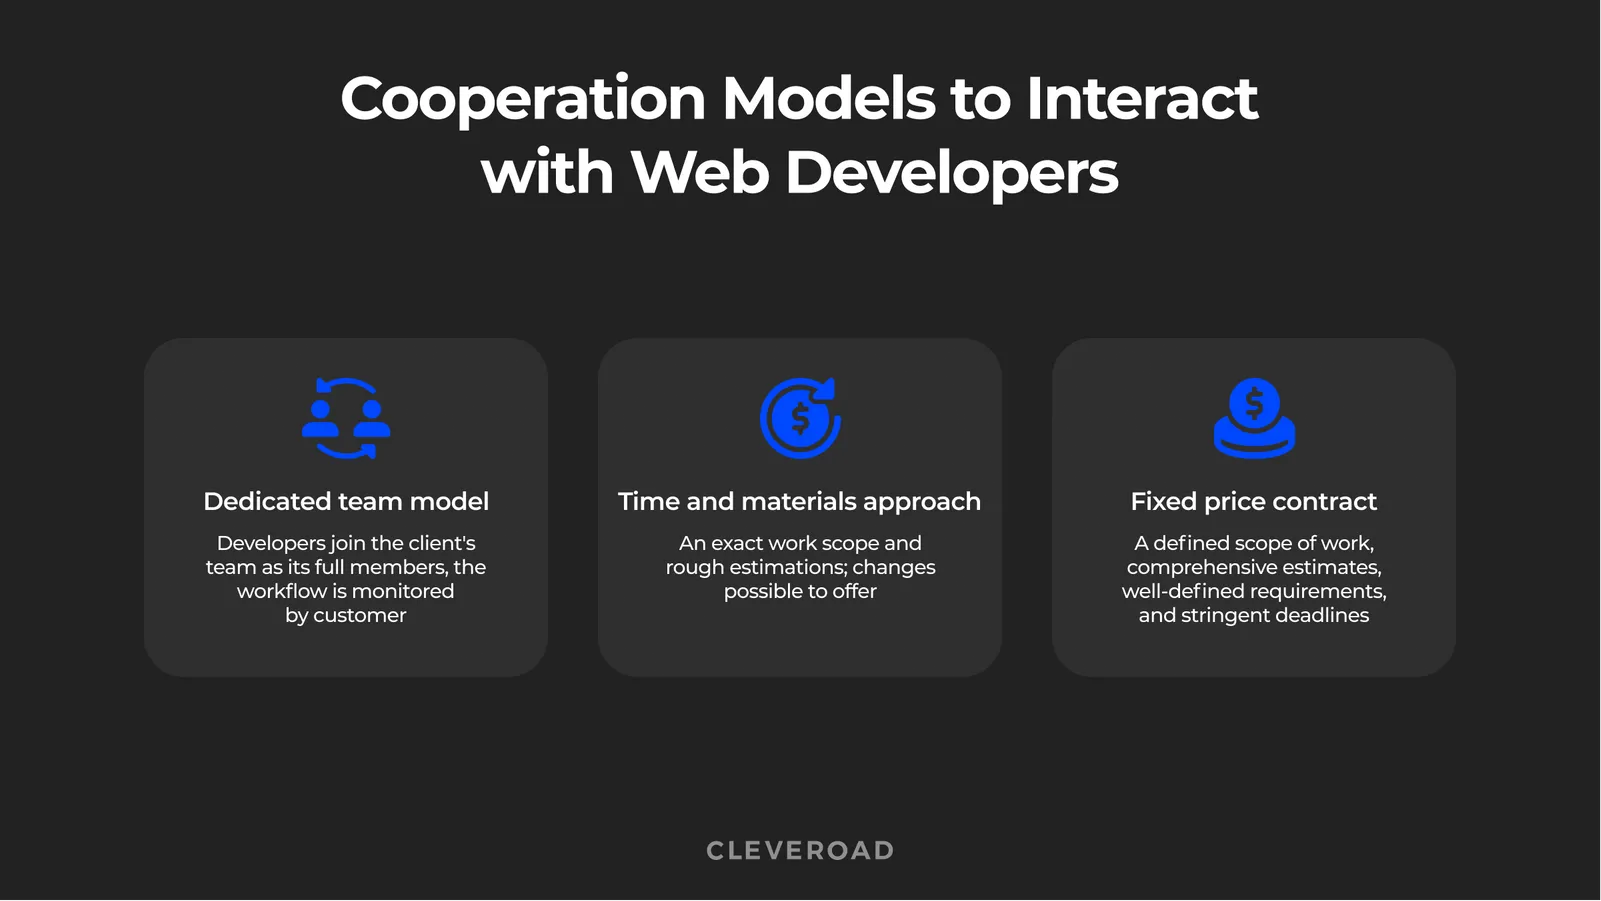 Cooperation models to interact with outsourced web developers